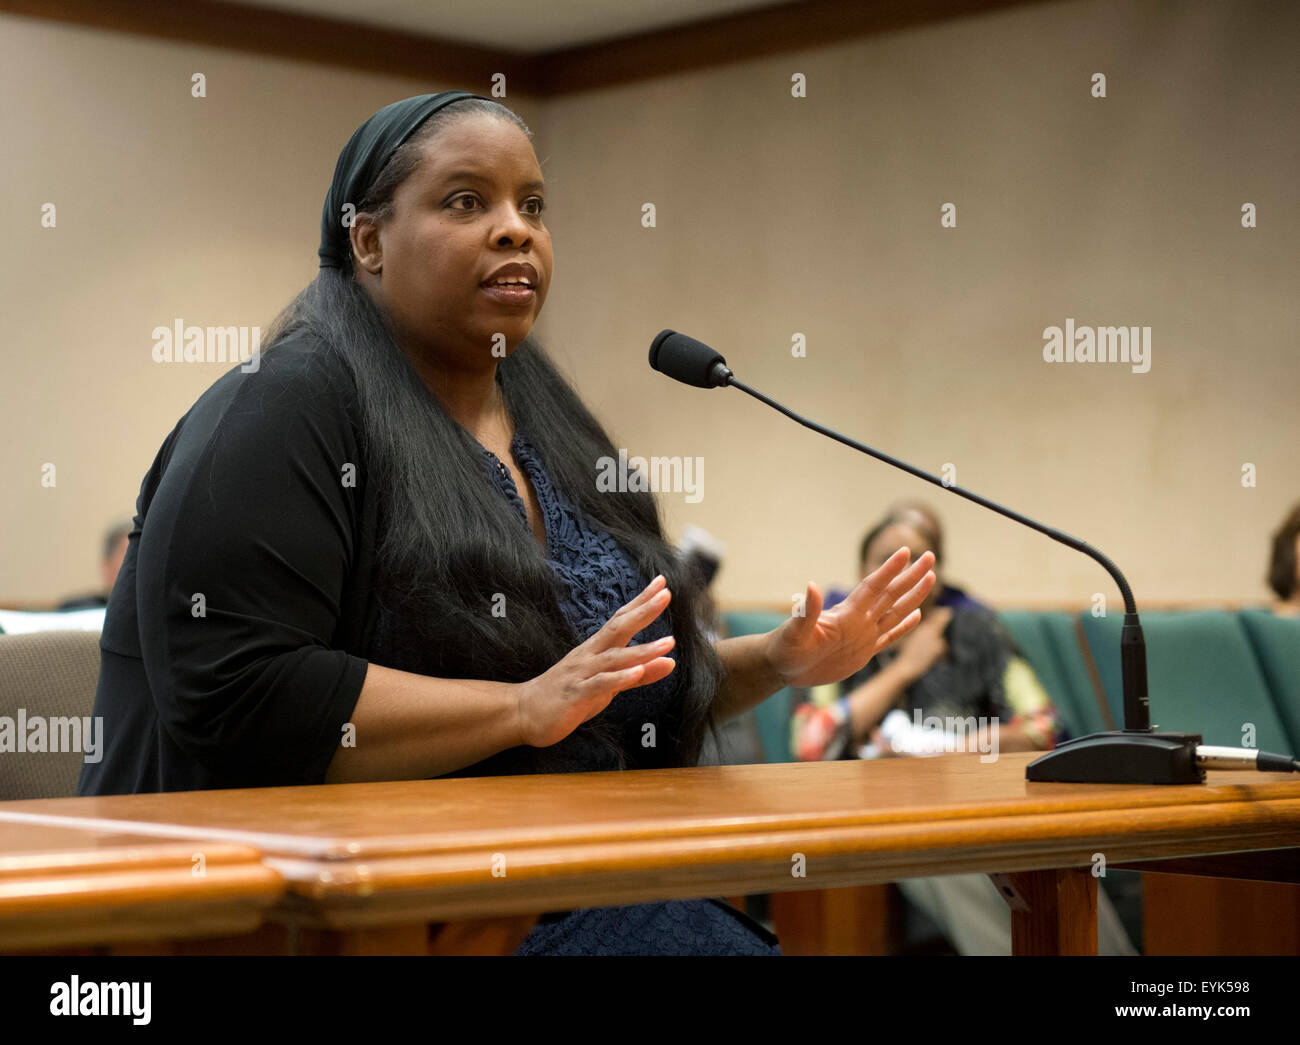 Austin, Texas USA July 30, 2015: Janet Baker, who lost a son in a Texas police shooting in Houston, speaks as Texas officials continue to investigate the death of Sandra Bland, who died July 13th in the Waller County jail after a traffic stop near Houston. The hearing at the Texas Capitol drew dozens of legislators and activists wanting answers after Bland's apparent jail suicide. Credit:  Bob Daemmrich/Alamy Live News Stock Photo